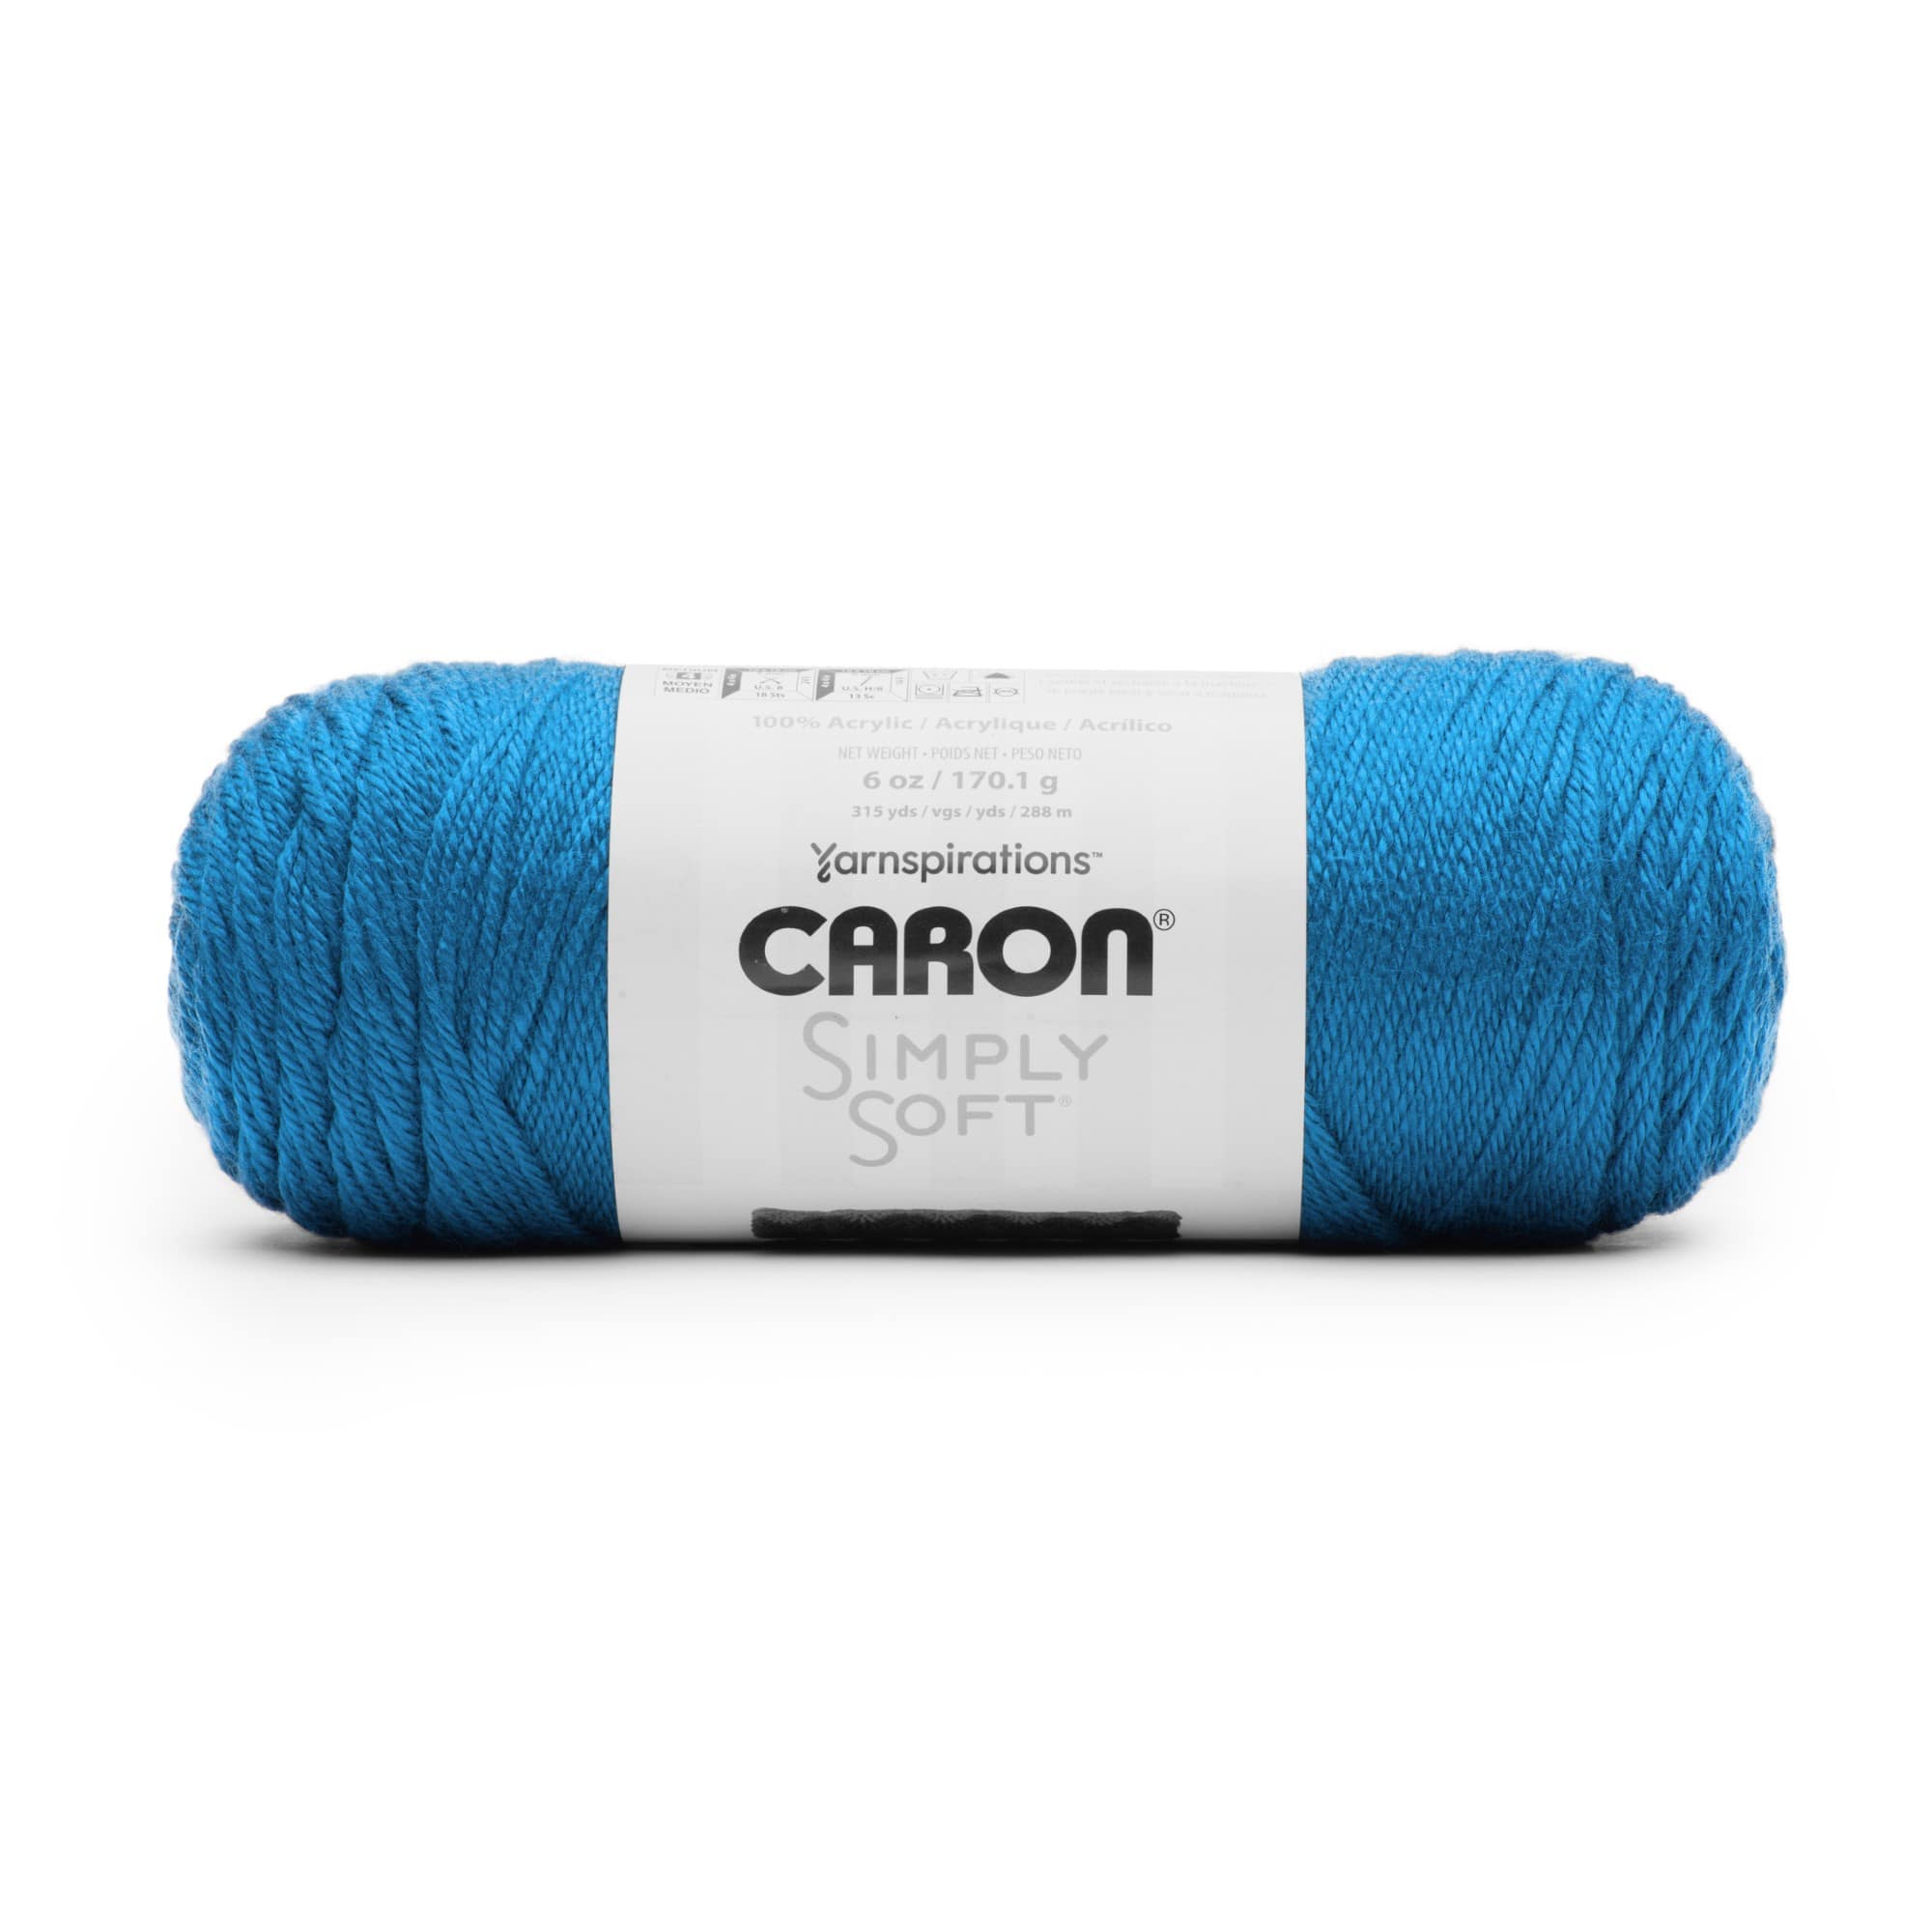 White Yarn 1 Skein Caron Simply Soft 9901 for sale online